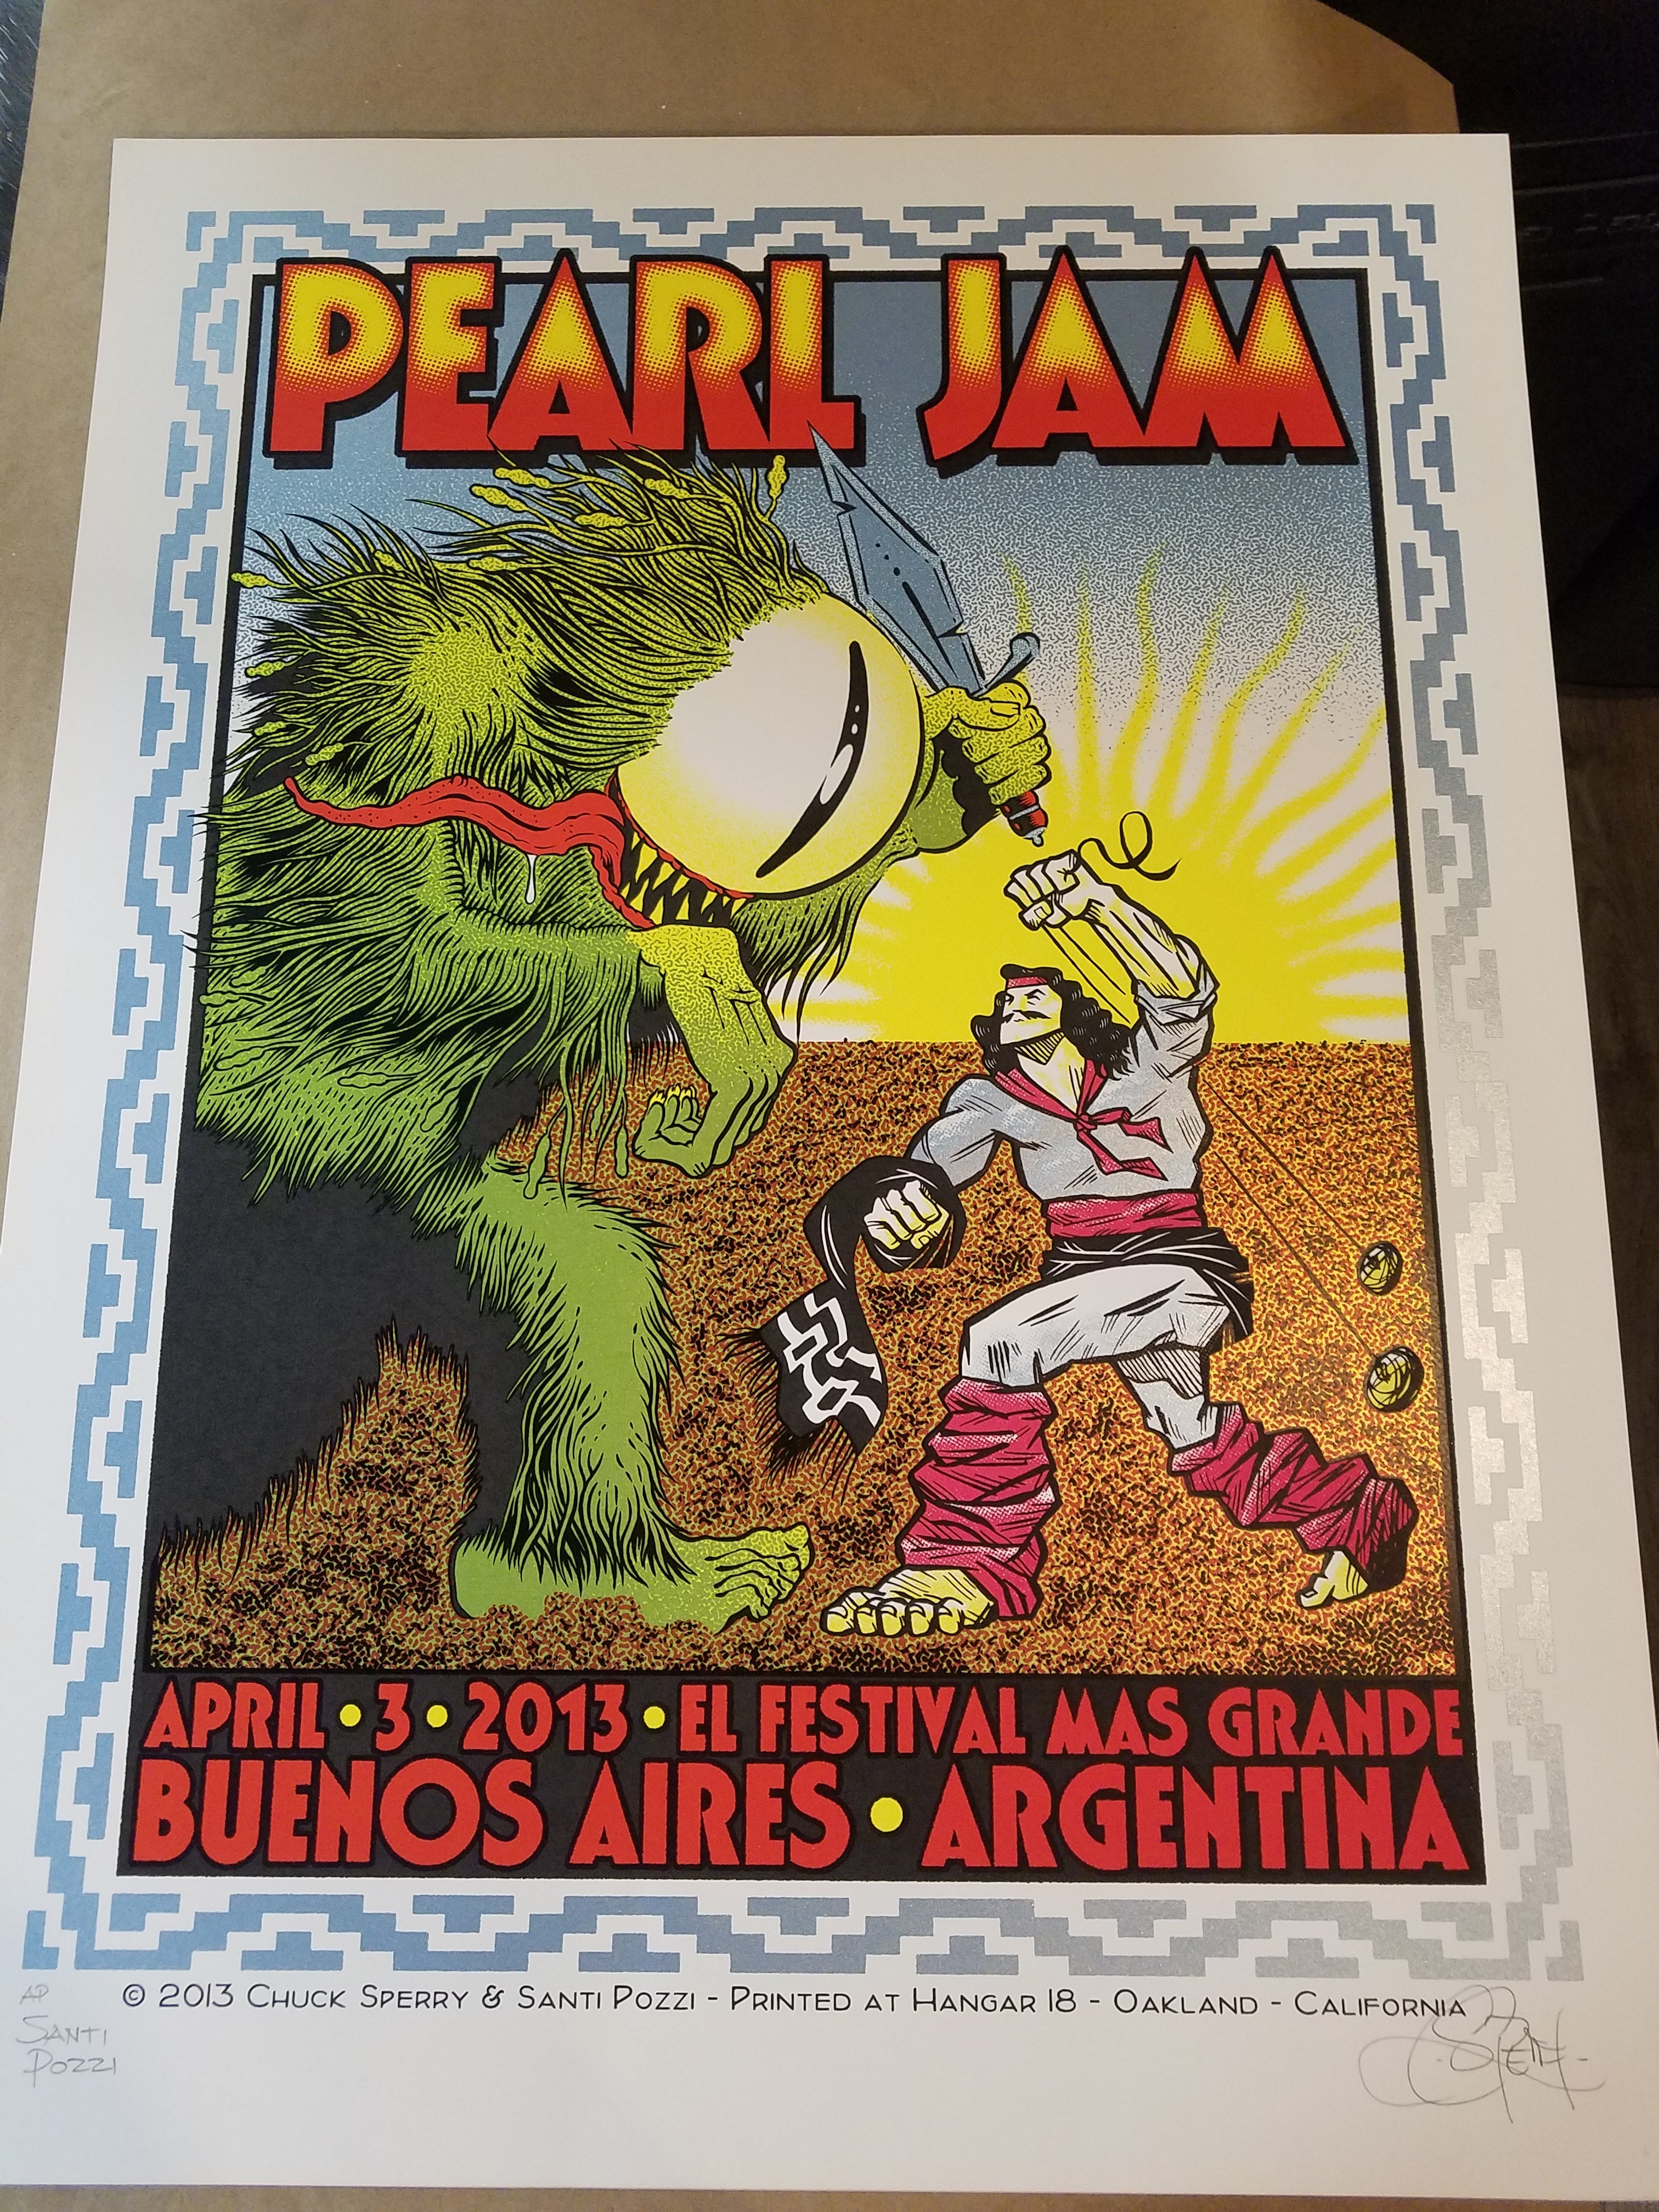  Pearl Jam Buenos Aires  4/3/2013 Limited Edition of 100, Signed and Numbered (Chuck Sperry signed – Chuck Sperry and Santi Pozzi – plate signed on the back)